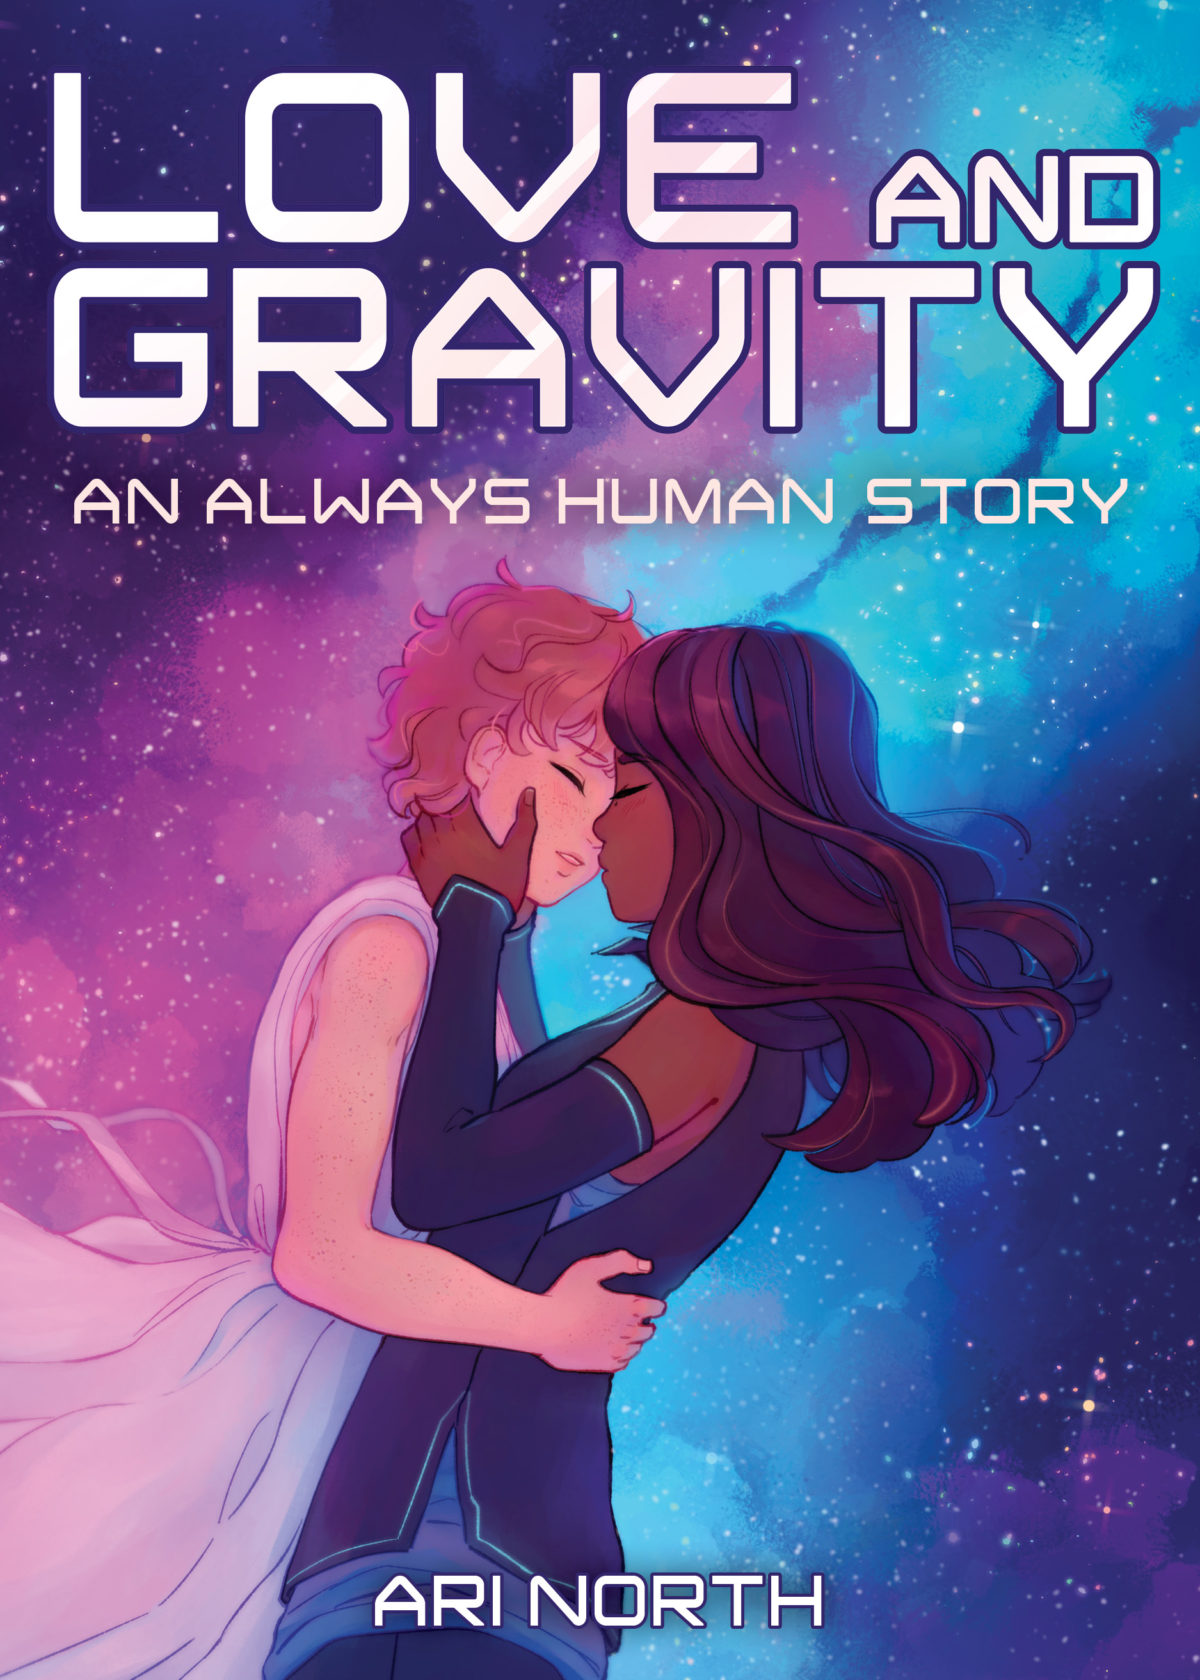 Love and Gravity: A Graphic Novel (Always Human, #2) (Paperback)